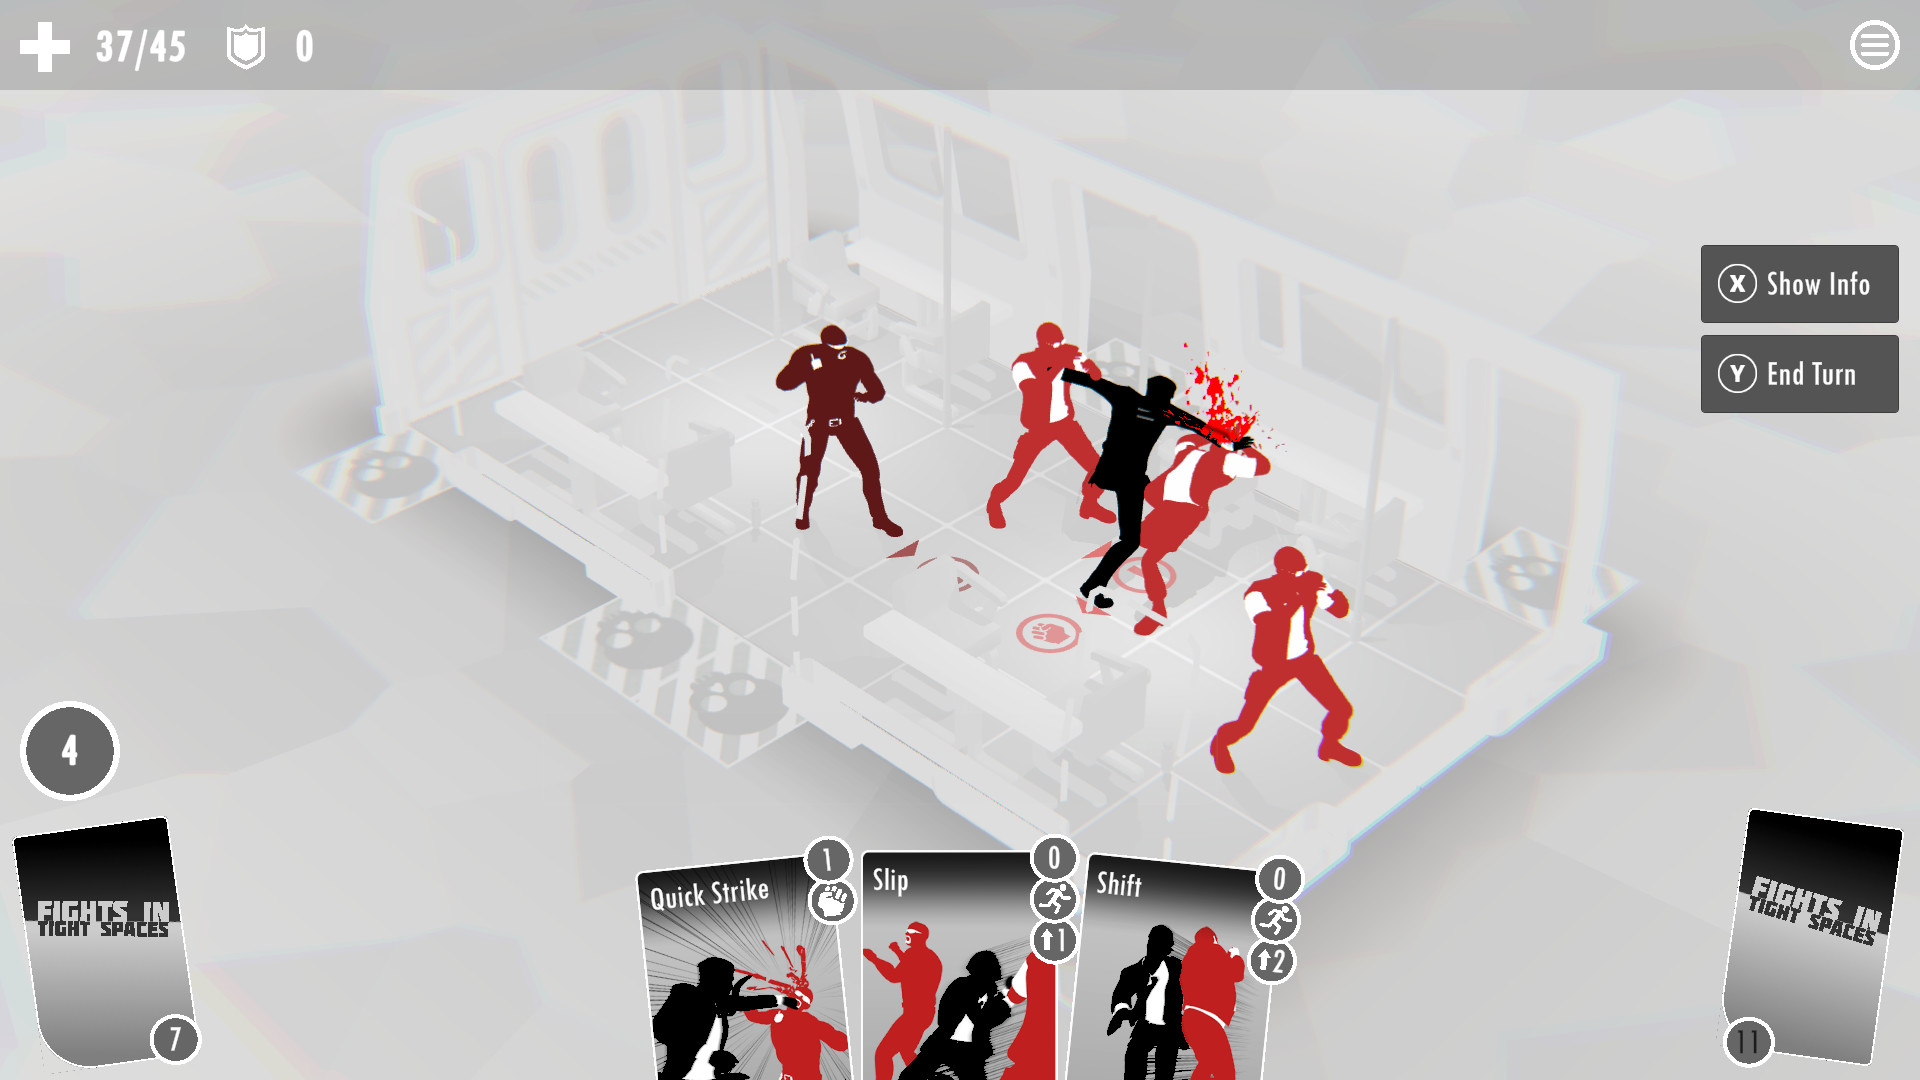 Fights in Tight Spaces on Steam